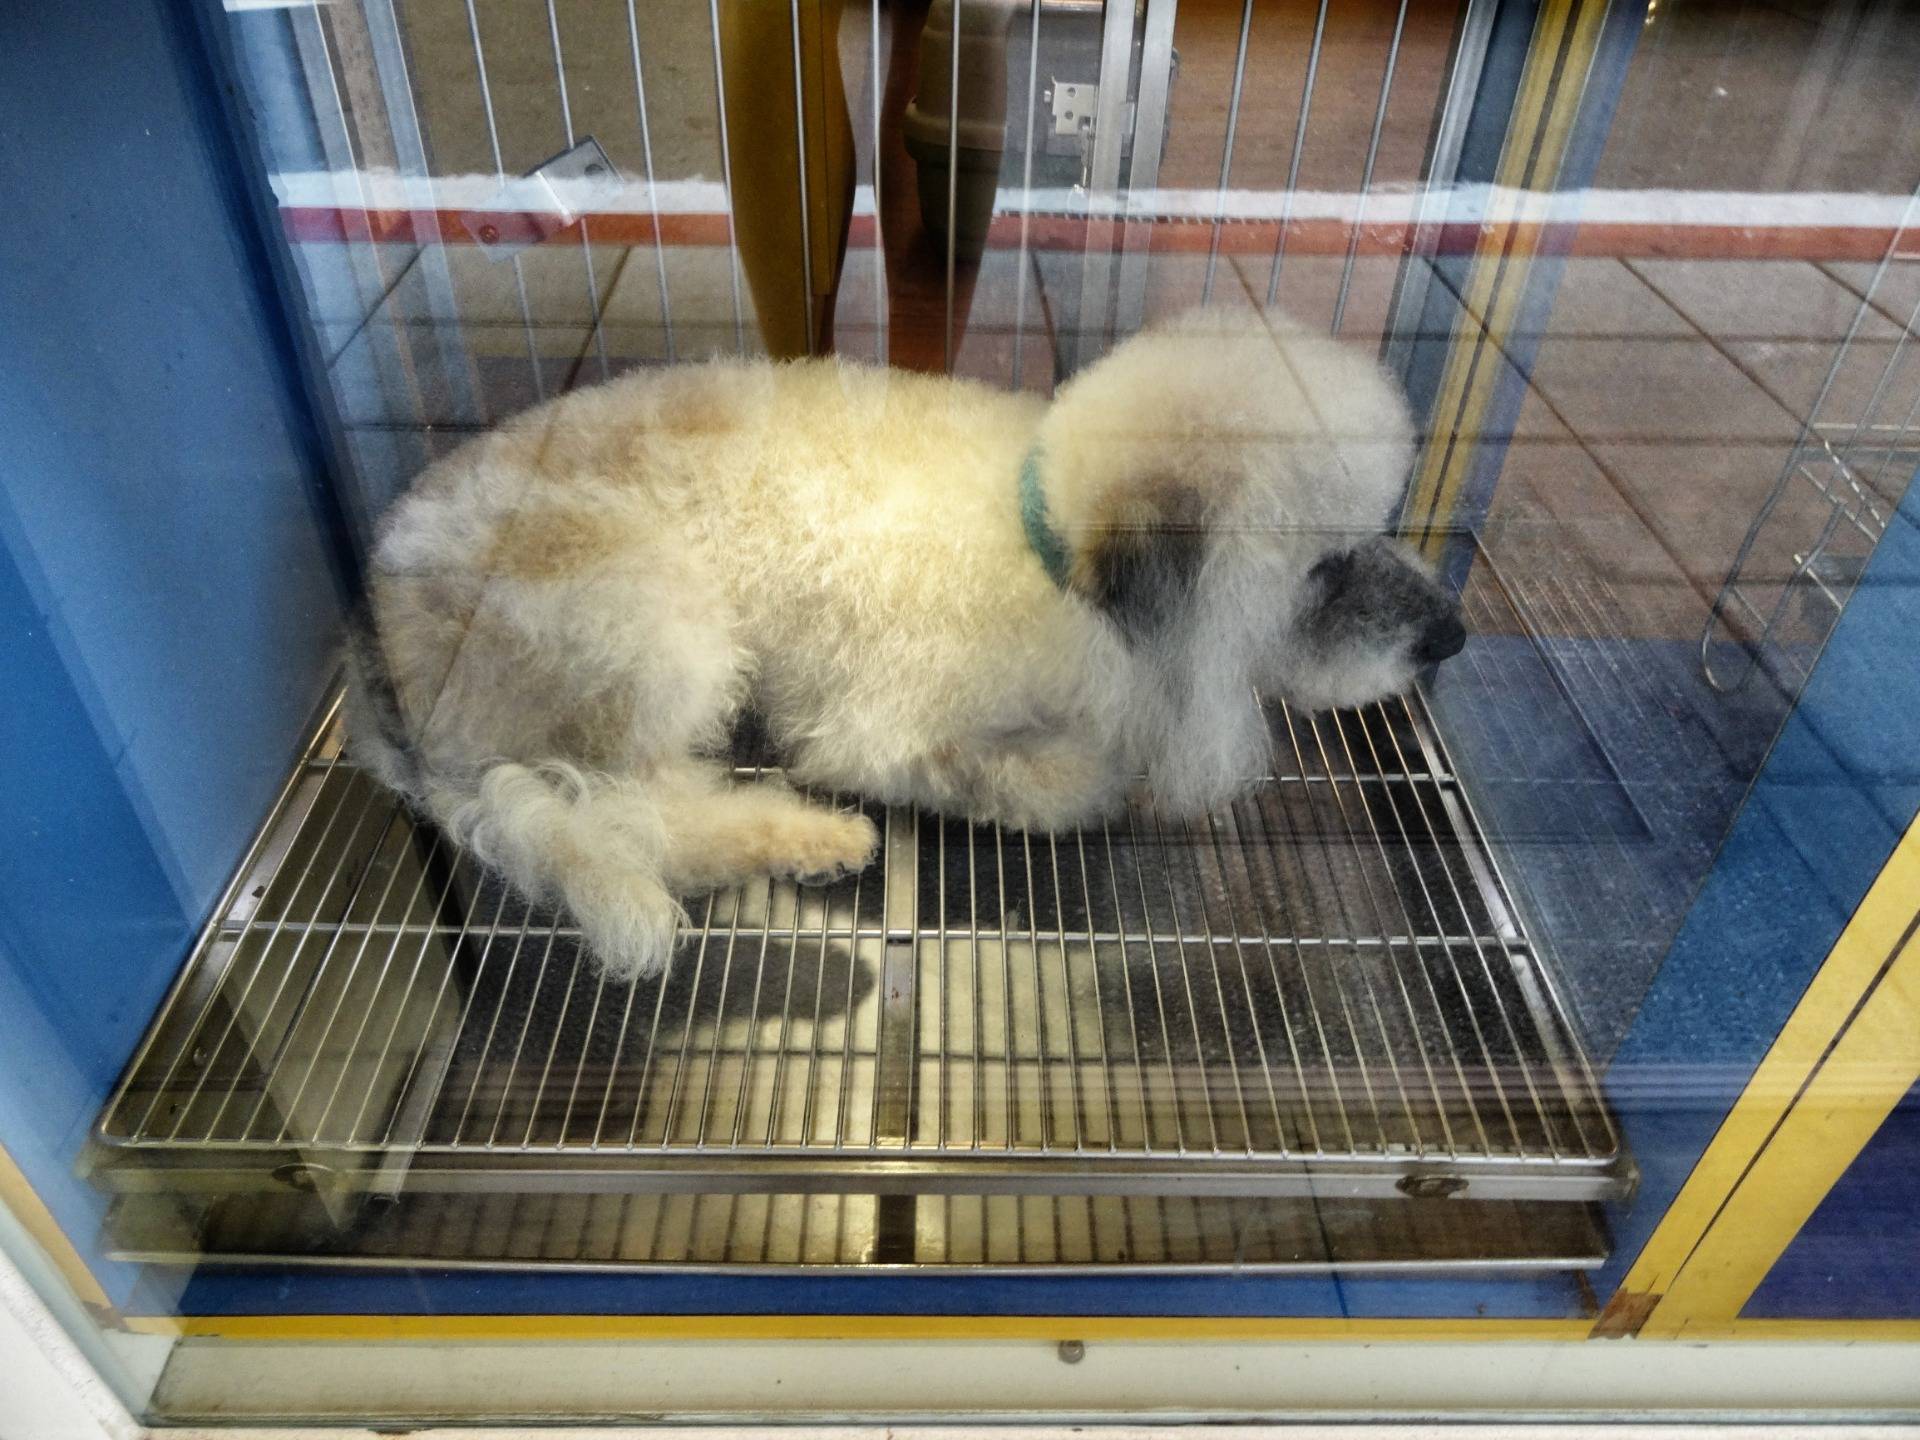 They are truly display dogs in shop windows to sell them